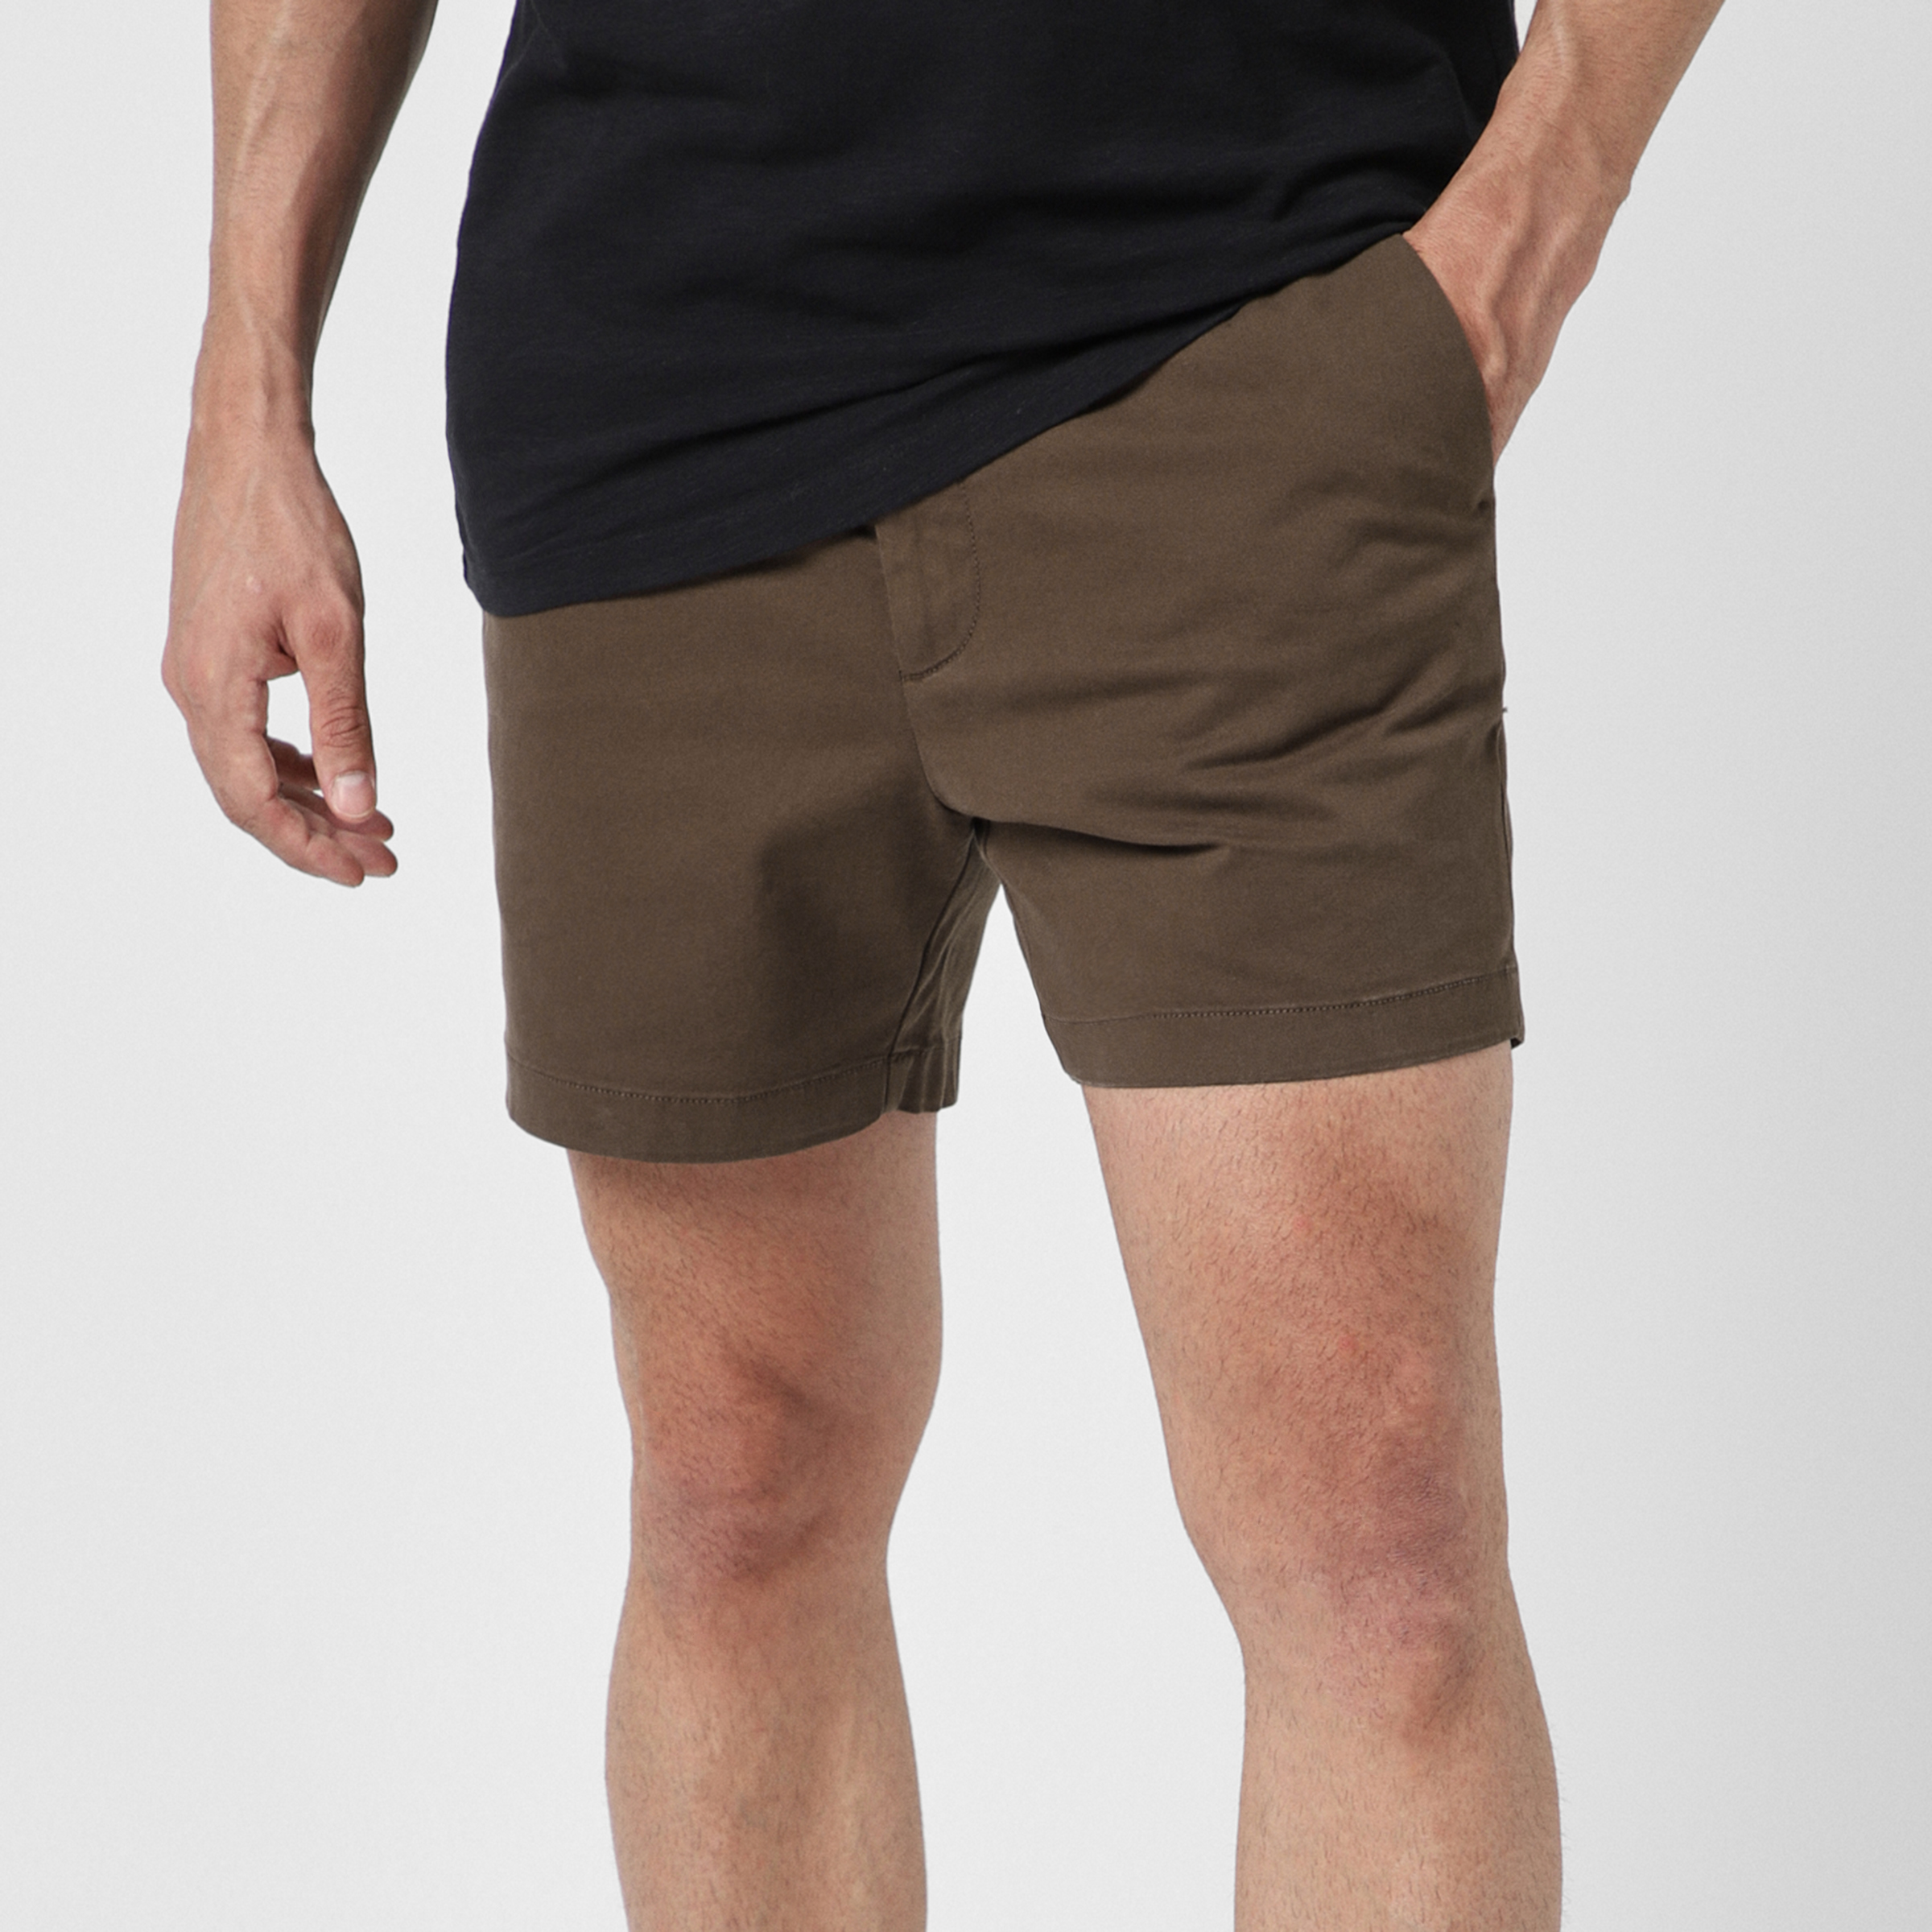 Stretch Chino Short 5.5" in Cocoa front on model